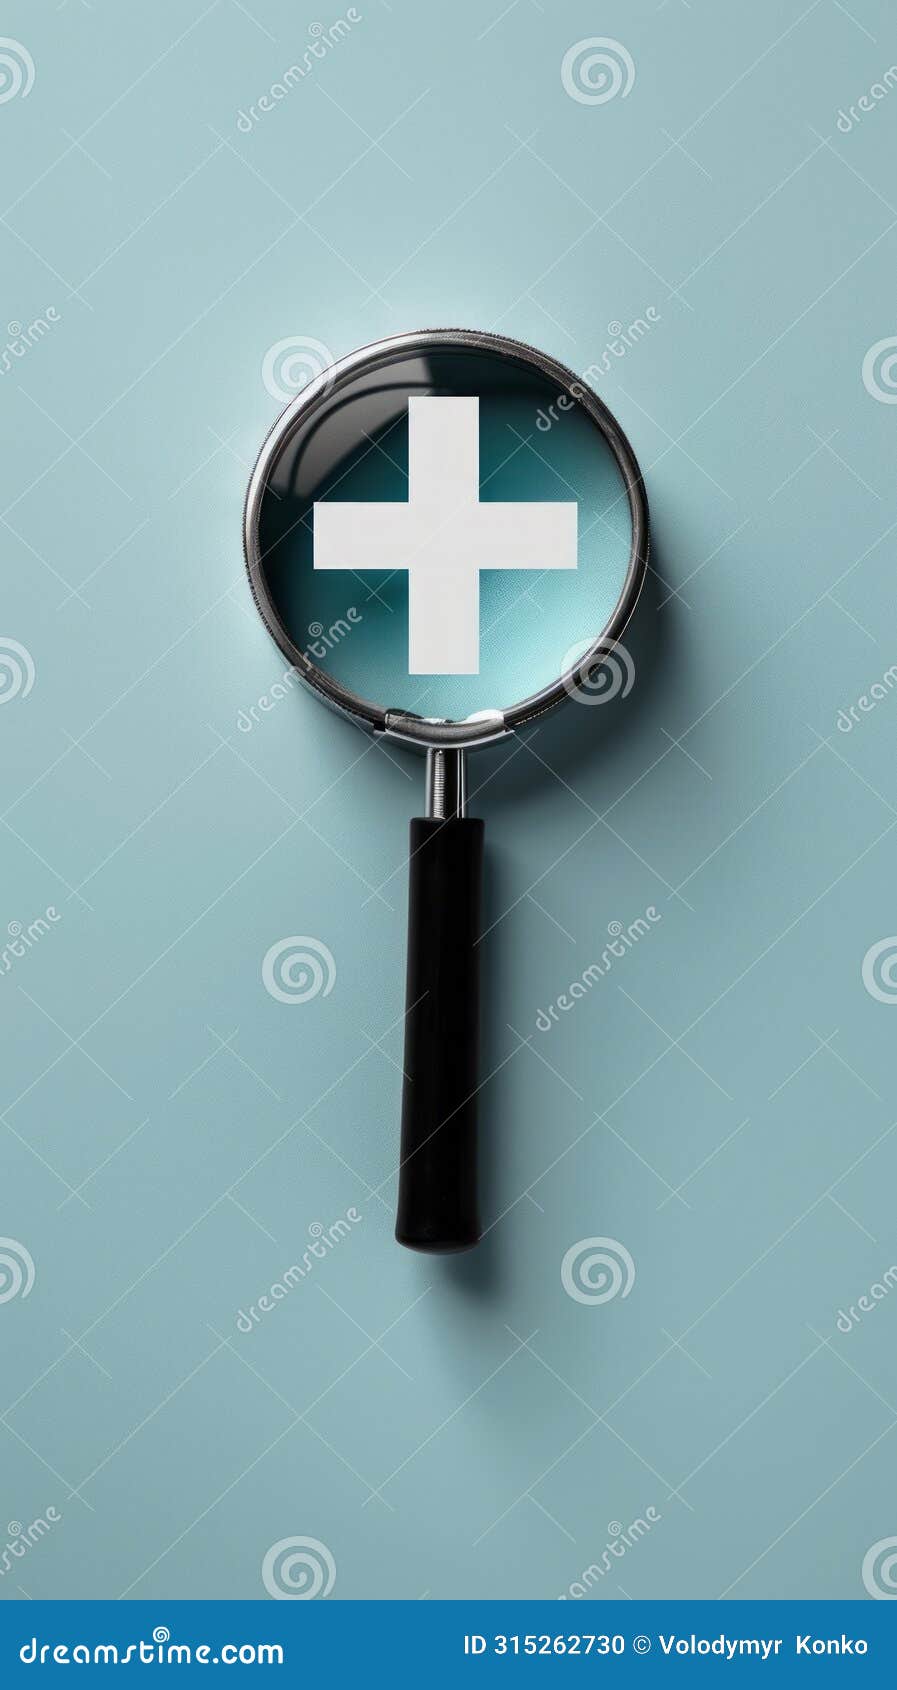 magnifying glass with white cross for precise examination and analysis